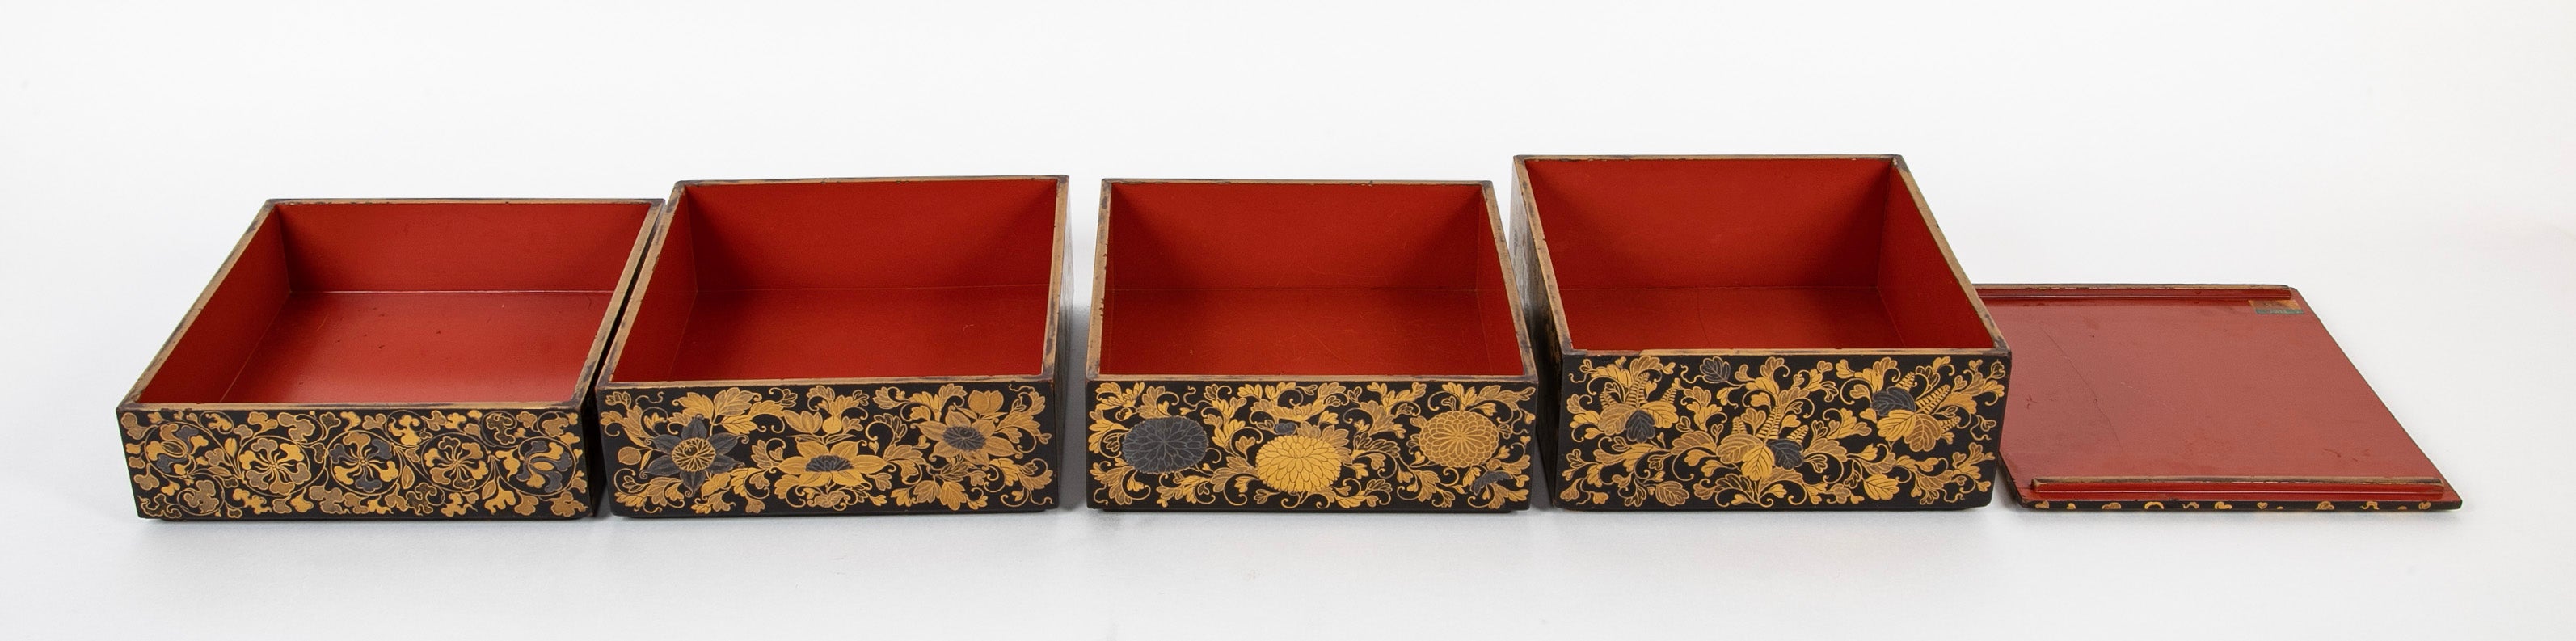 A Japanese Black Lacquer 4 Tier Bento Box with Gilt Floral Designs